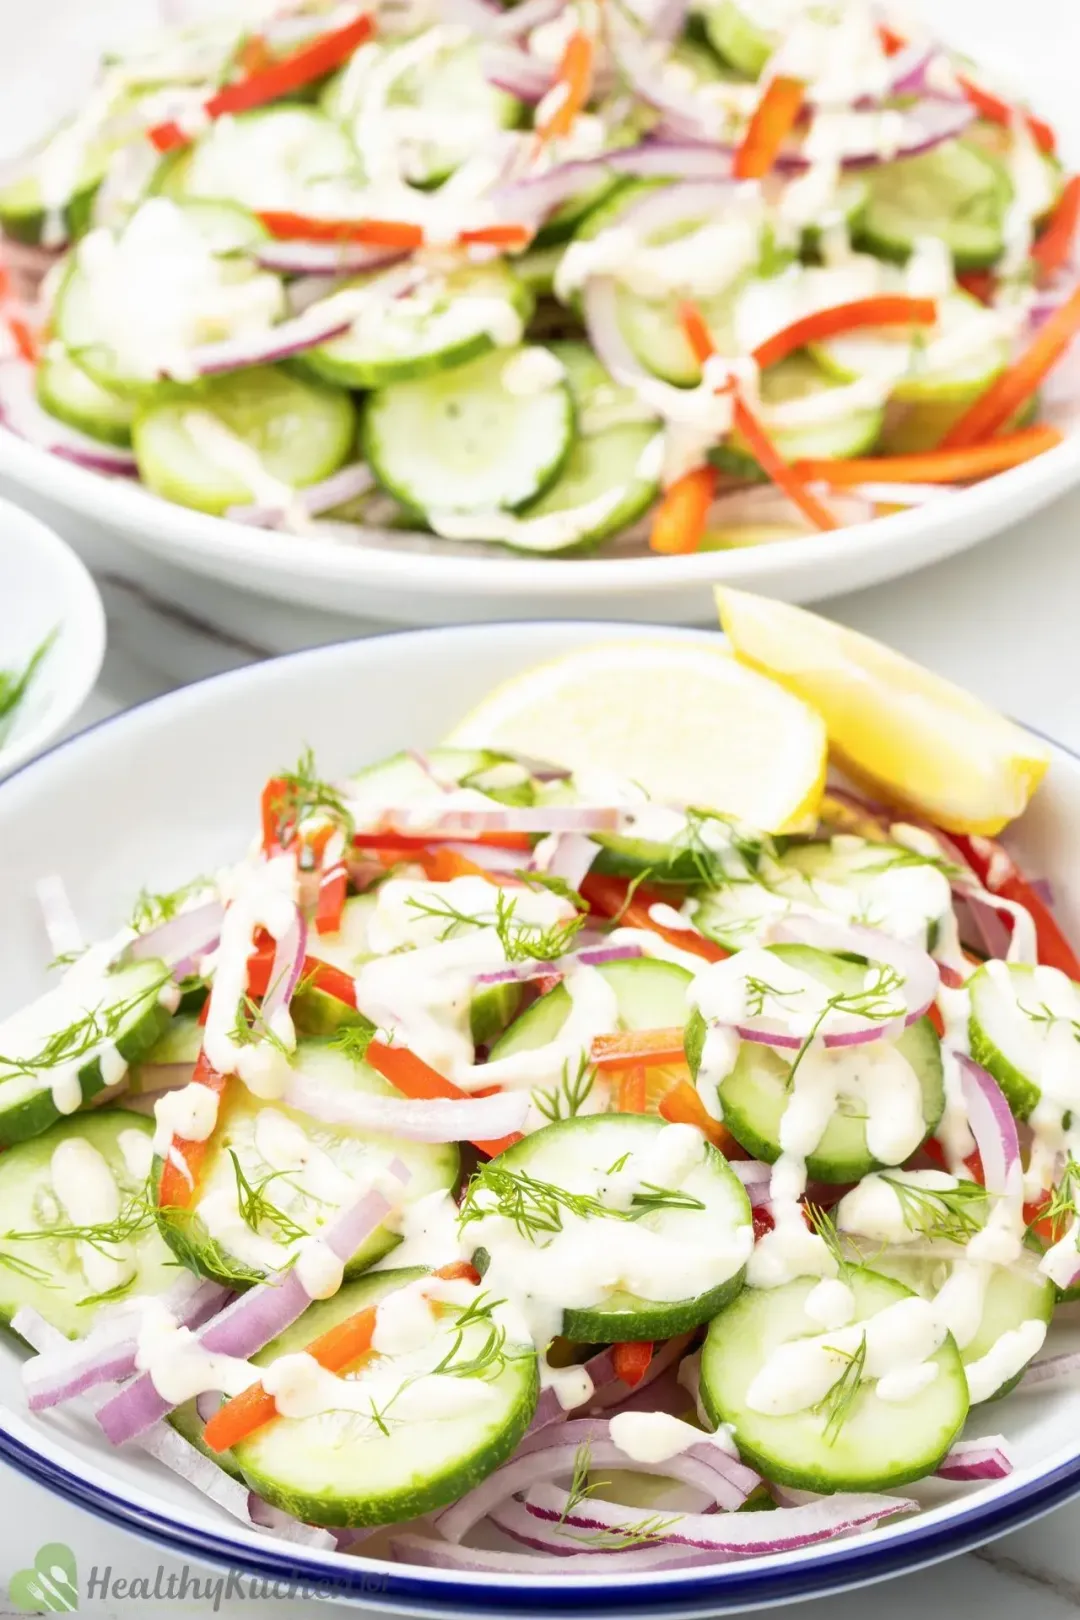 Three plates of cucumber salad: sliced cucumber, sliced red peppers, lemon slices, and dill sprinkles